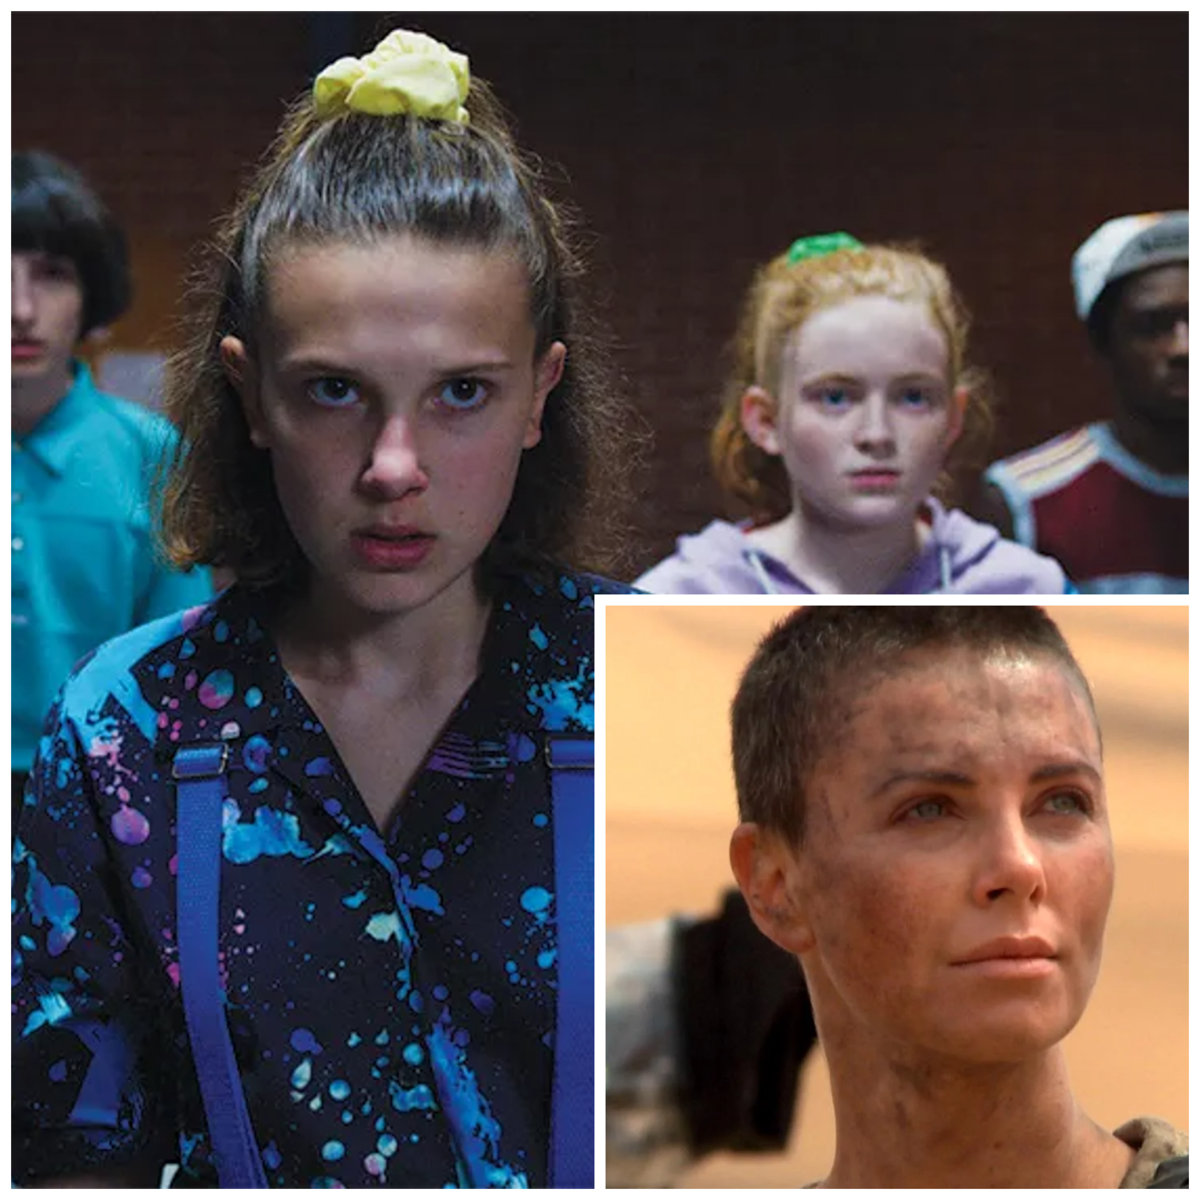 Millie Bobby Brown's character on "Stranger Things" (Eleven) was inspired by Imperator Furiosa, Charlize Theron's character in "Mad Max: Fury Road" (2015).